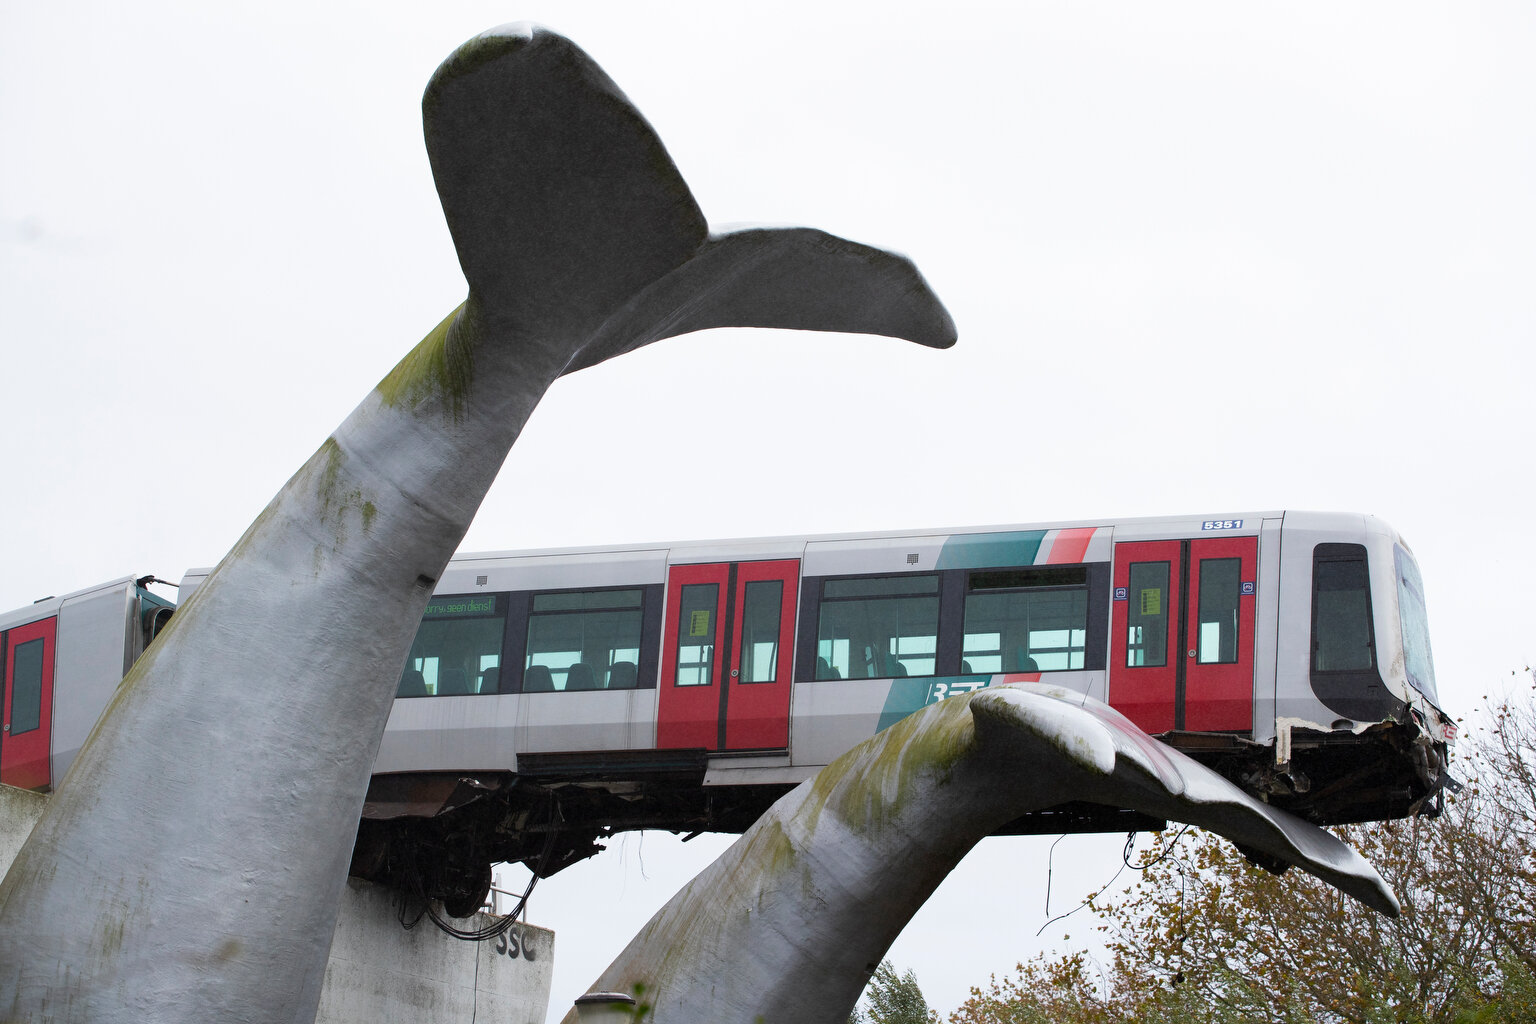  A whale tail sculpture holds the front carriage of a metro train as it rammed through the end of an elevated section of tracks in Spijkenisse, near Rotterdam, Netherlands, on Monday, Nov. 2, 2020. (AP Photo/Peter Dejong) 